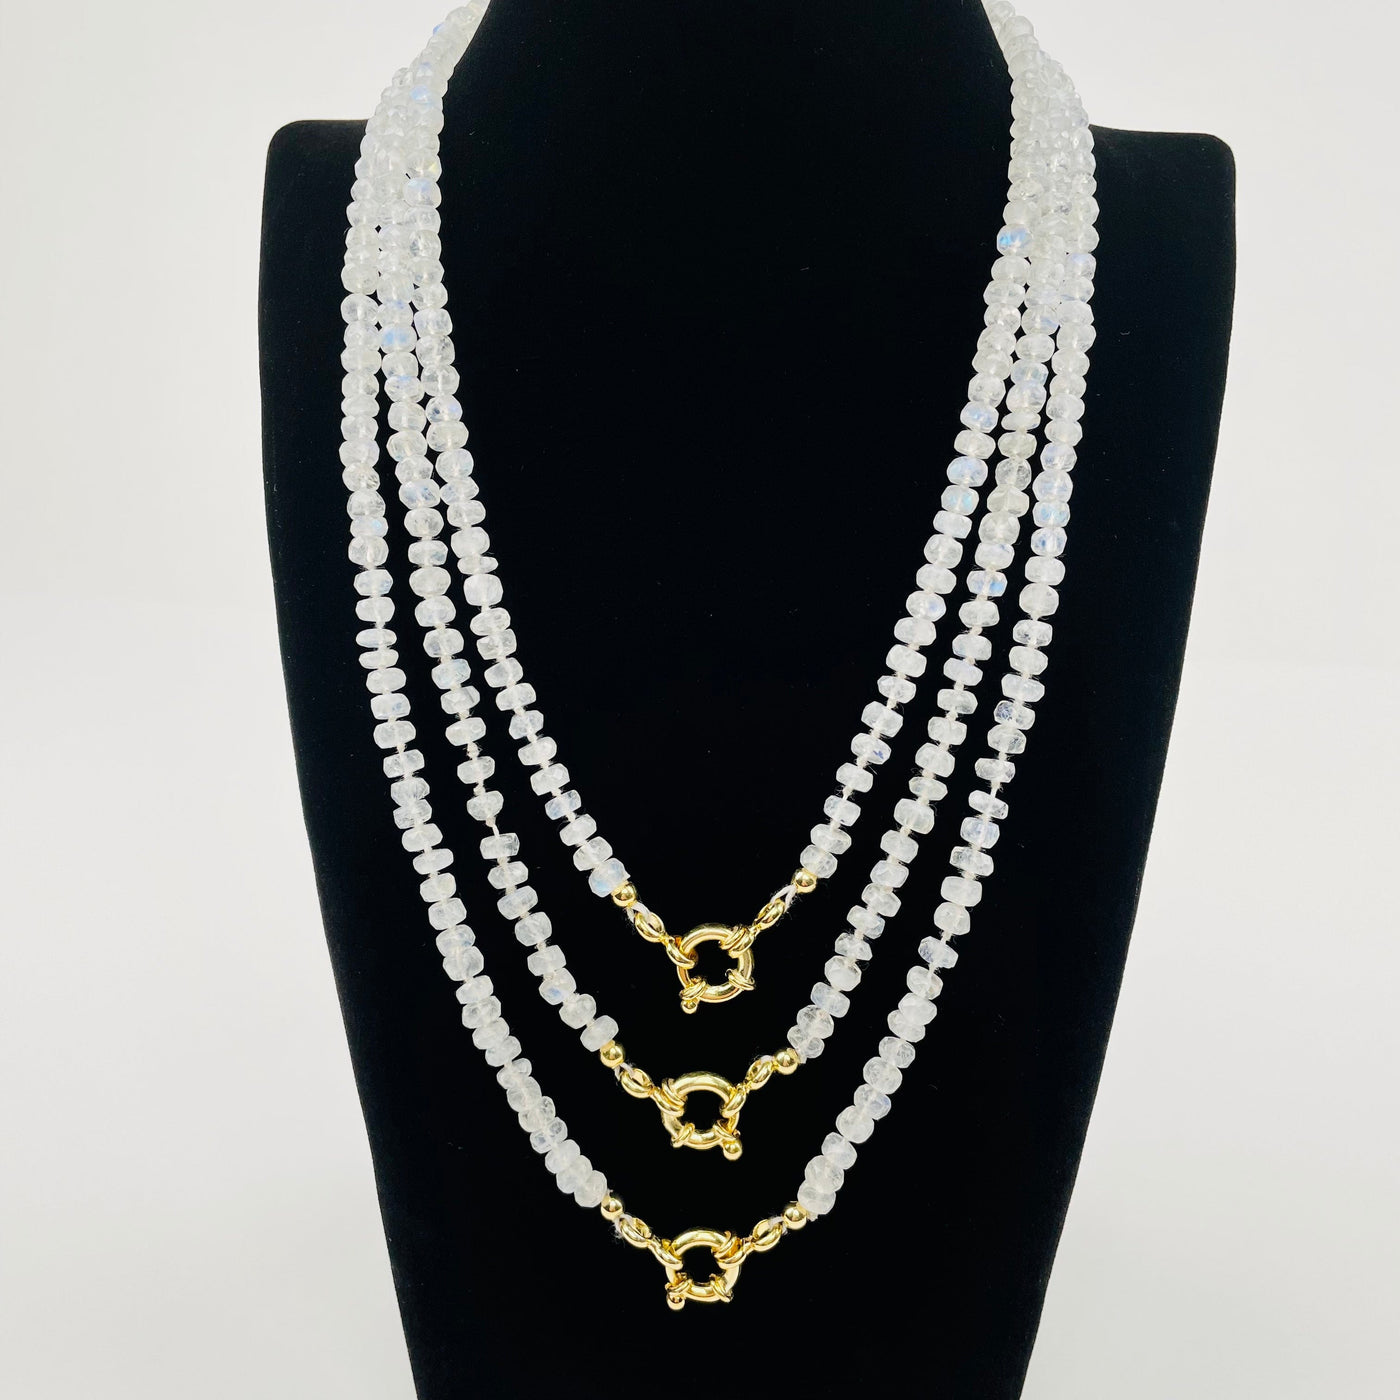 moonstone necklaces available in three sizes, 16", 18" and 20"